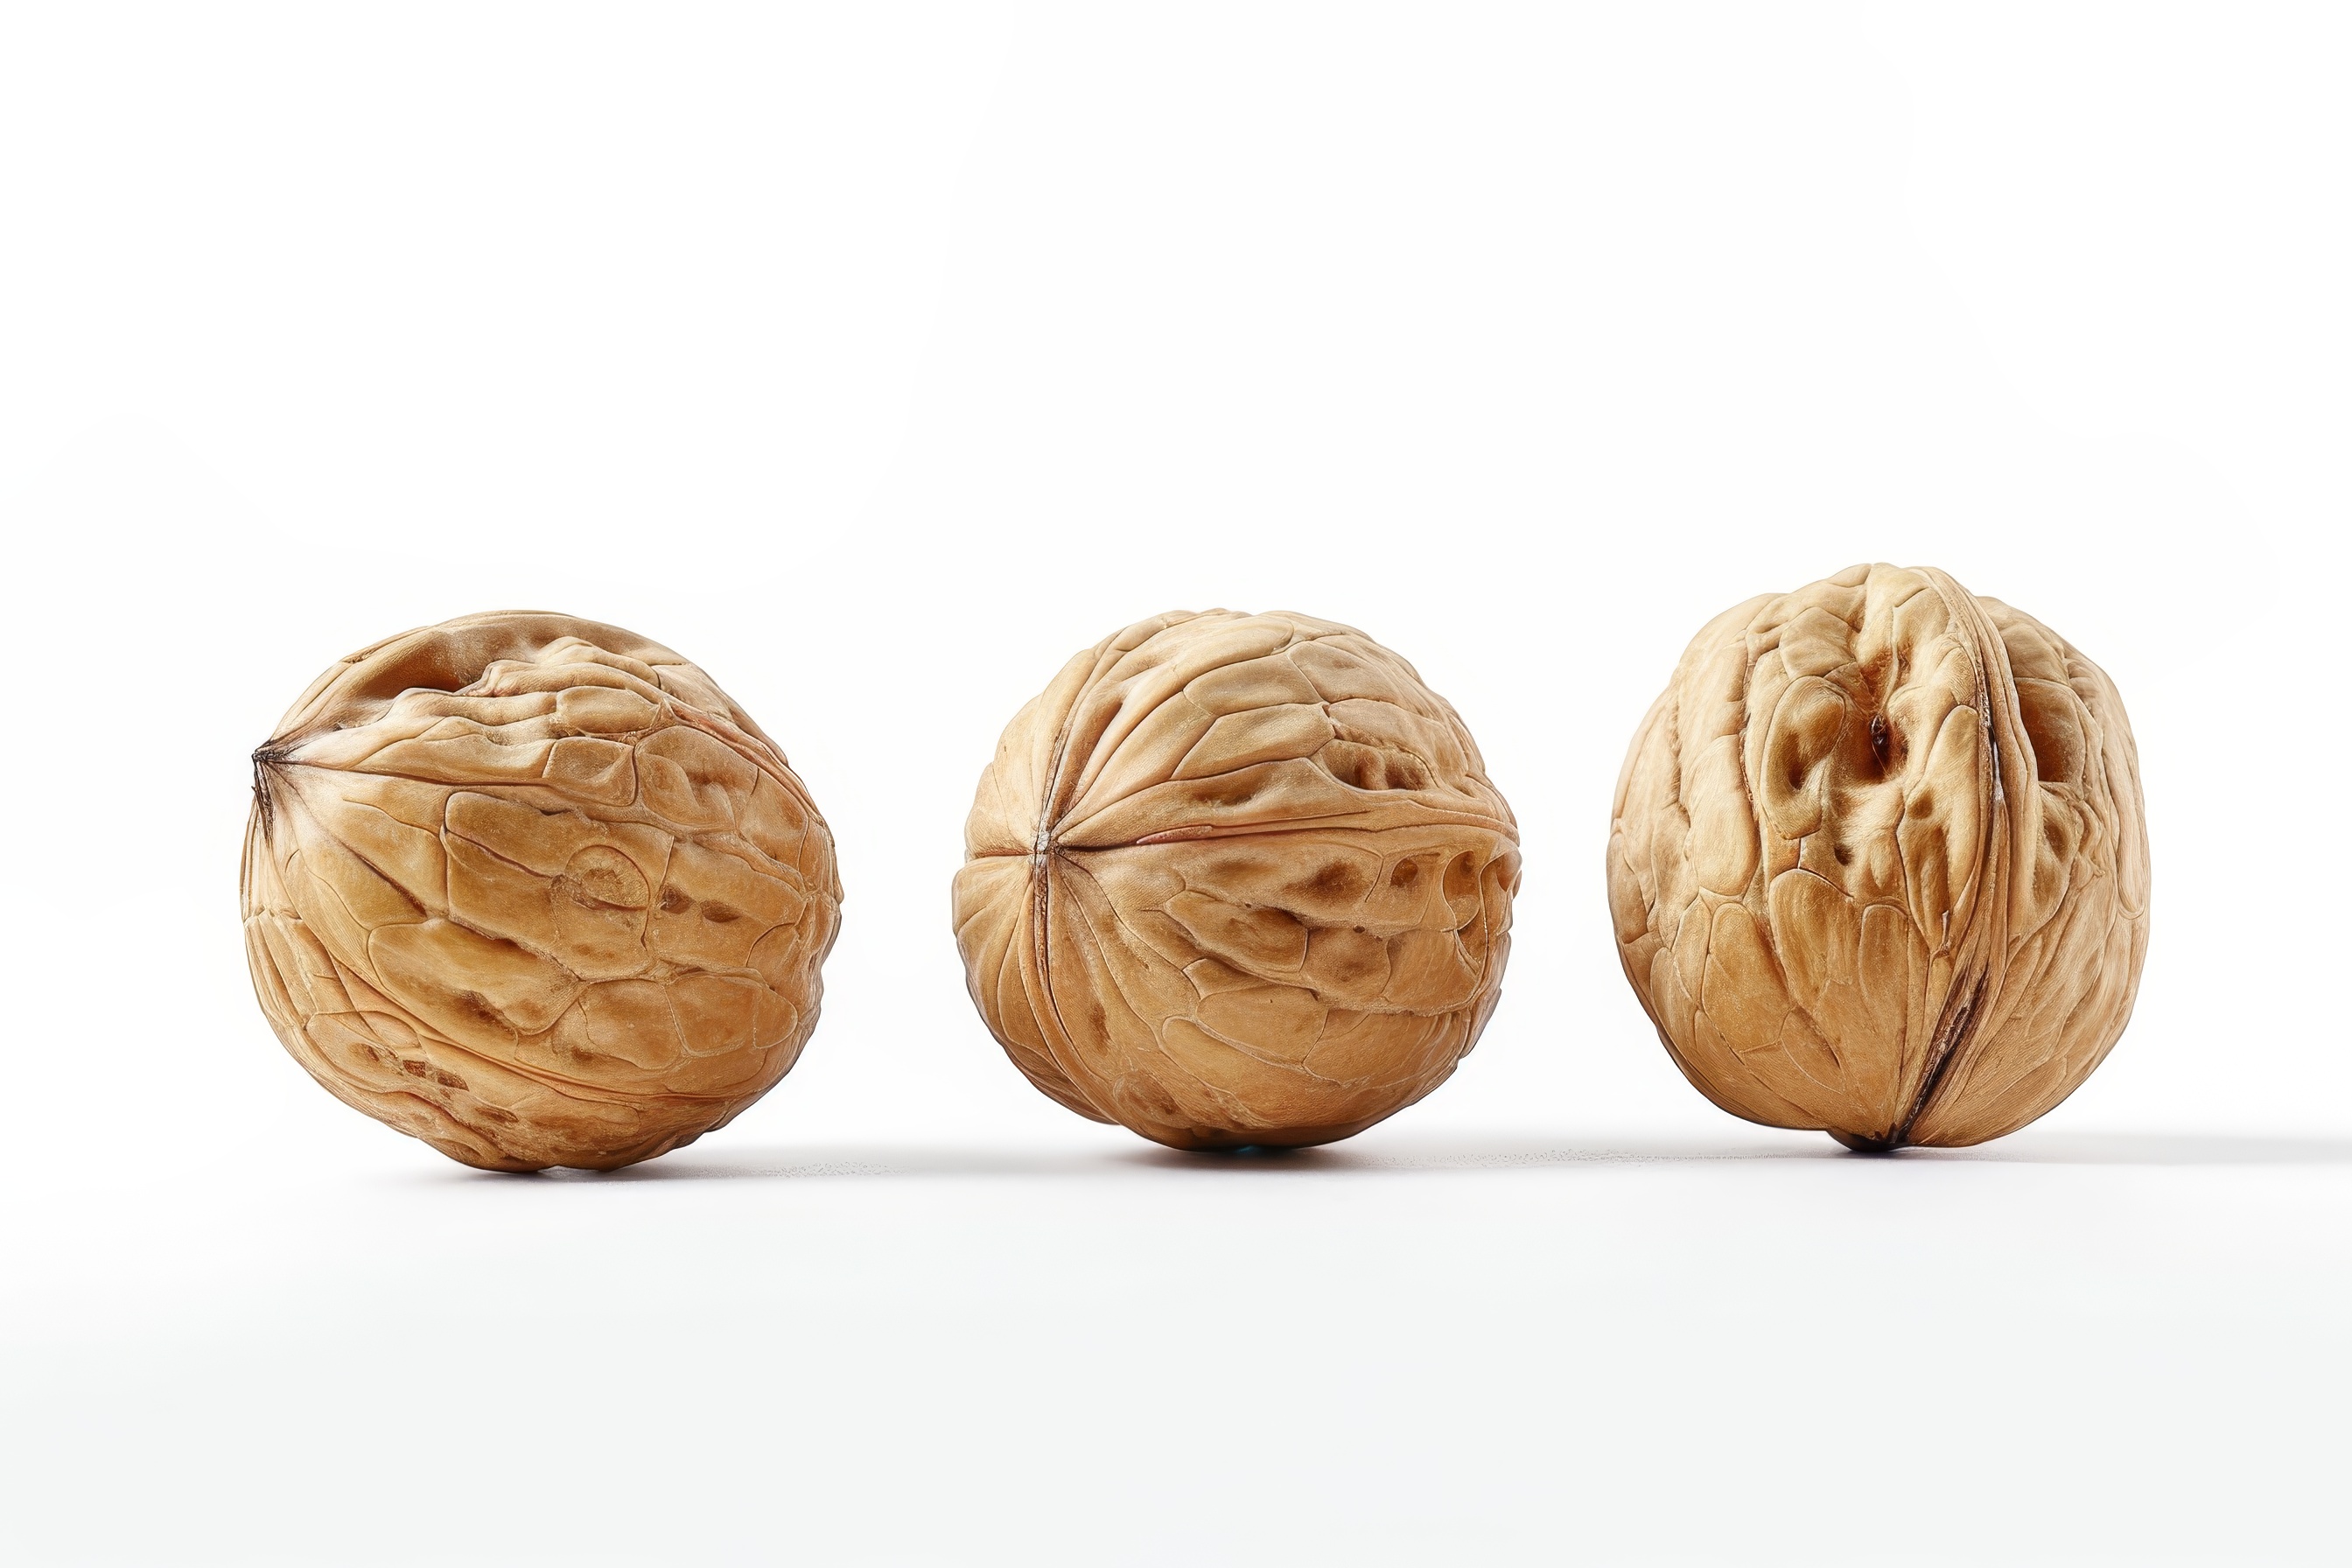 Three walnuts isolated on white background